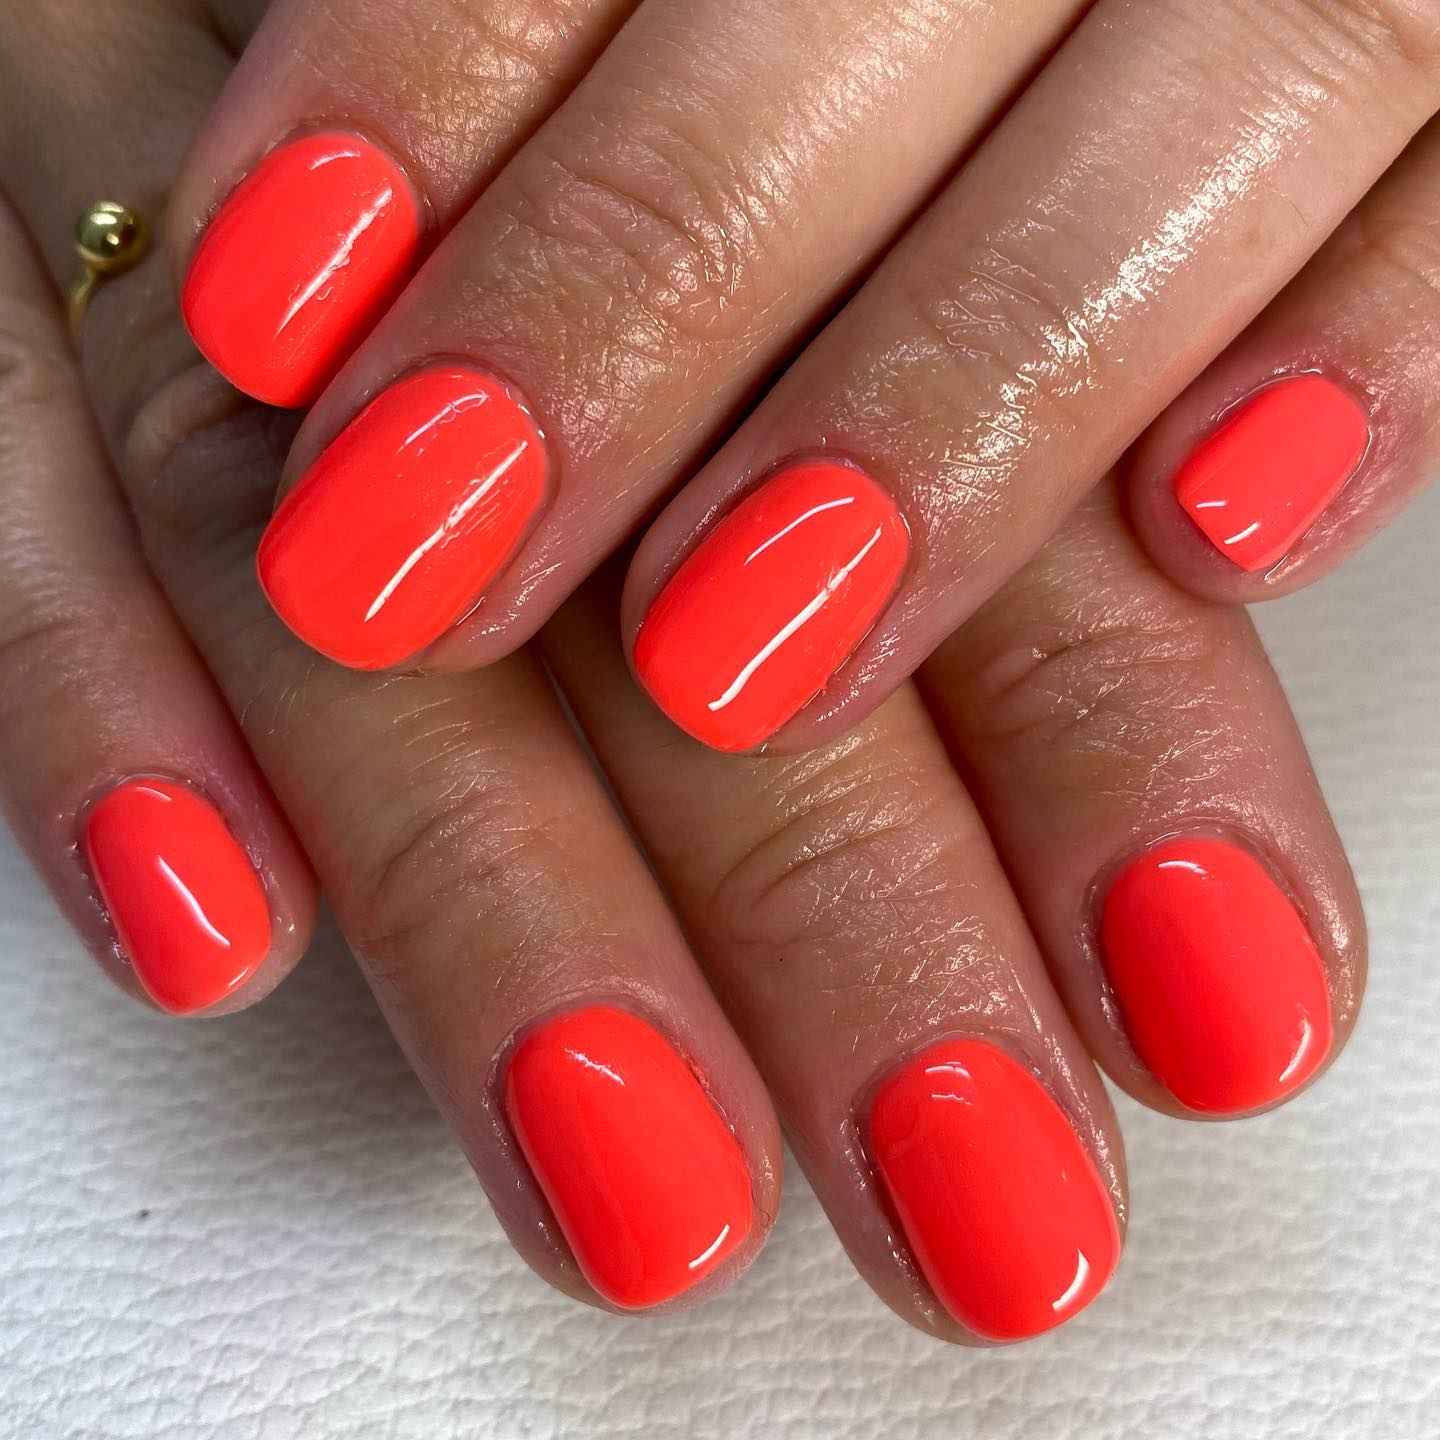 When it comes to find the best summer nail color ideas, shiny and plain orange mani is a great choice for you.